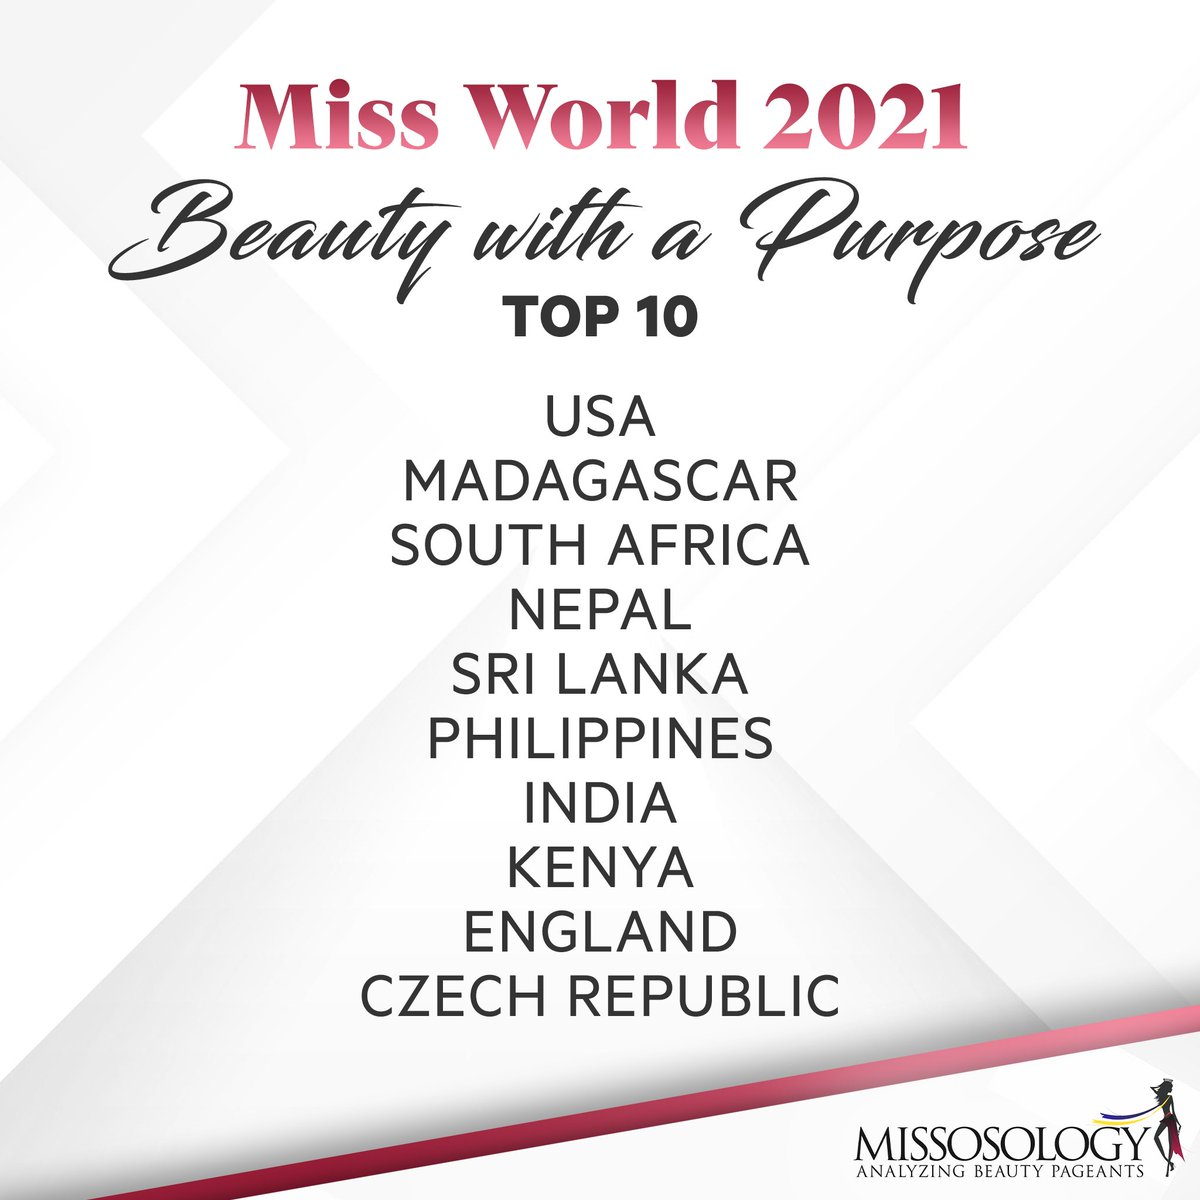 𝗟𝗢𝗢𝗞 | Check out the Top 10 finalists for the Miss World 2021 Beauty With A Purpose.

#mw21pr #MissWorld #70thMissWorld #MissWorld2021 #MissosologyBig5 #PageantsThatMatter #RelevantPageants